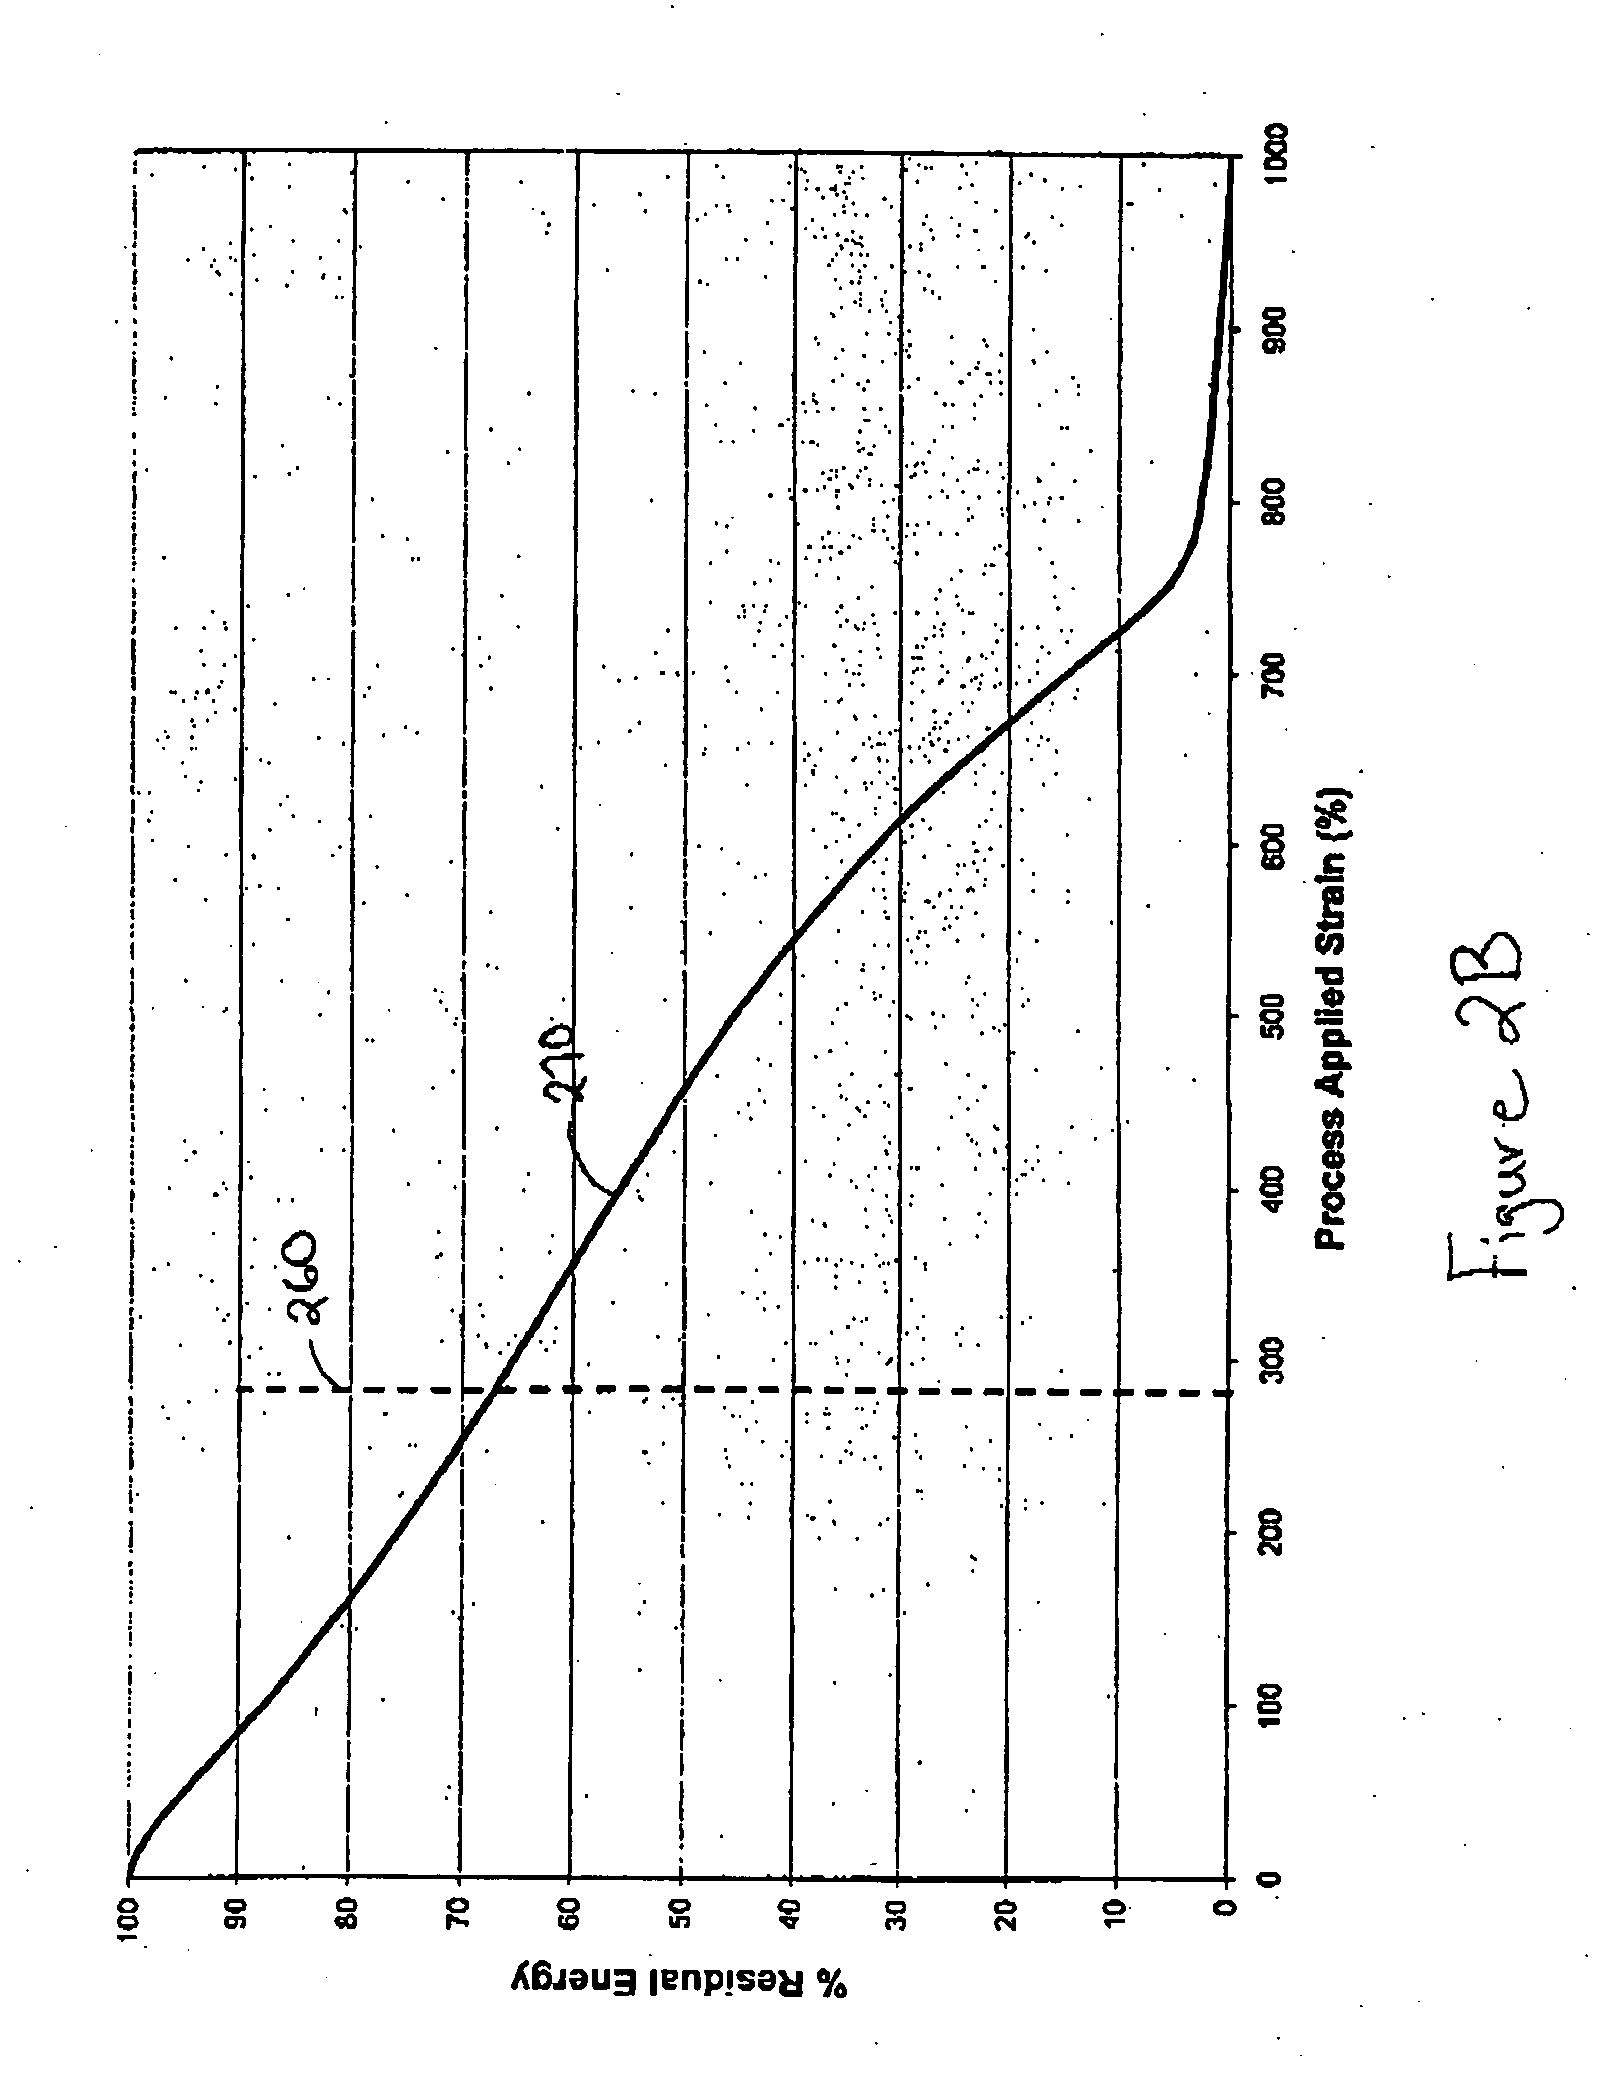 Method of making laminate structures for mechanical activation